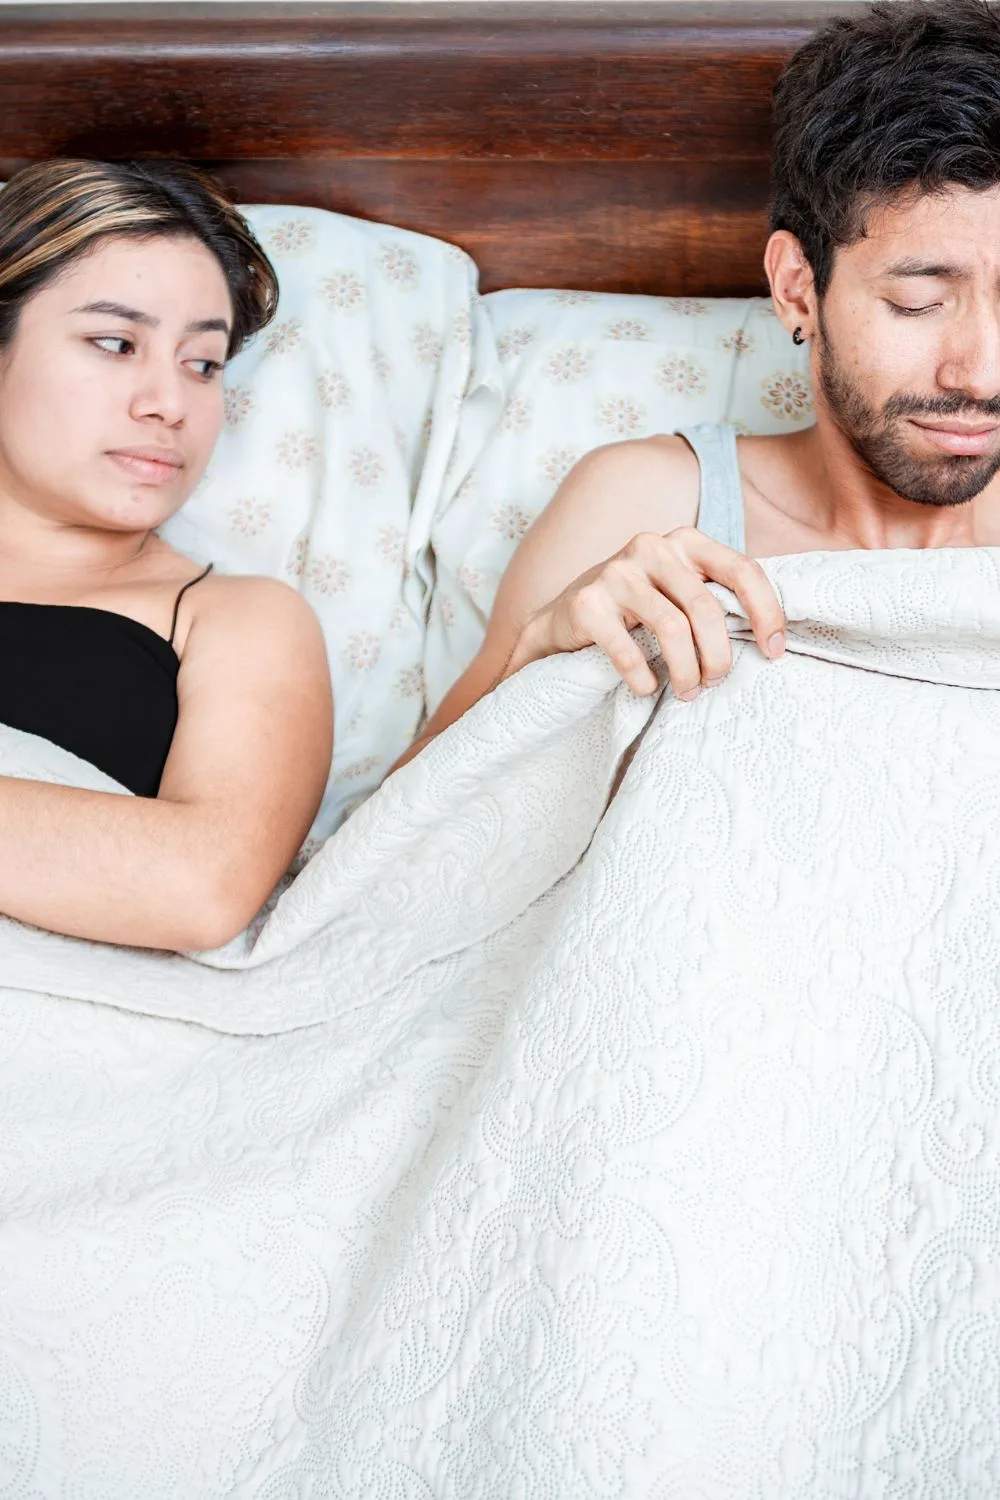 Why is my wife so boring in bed?